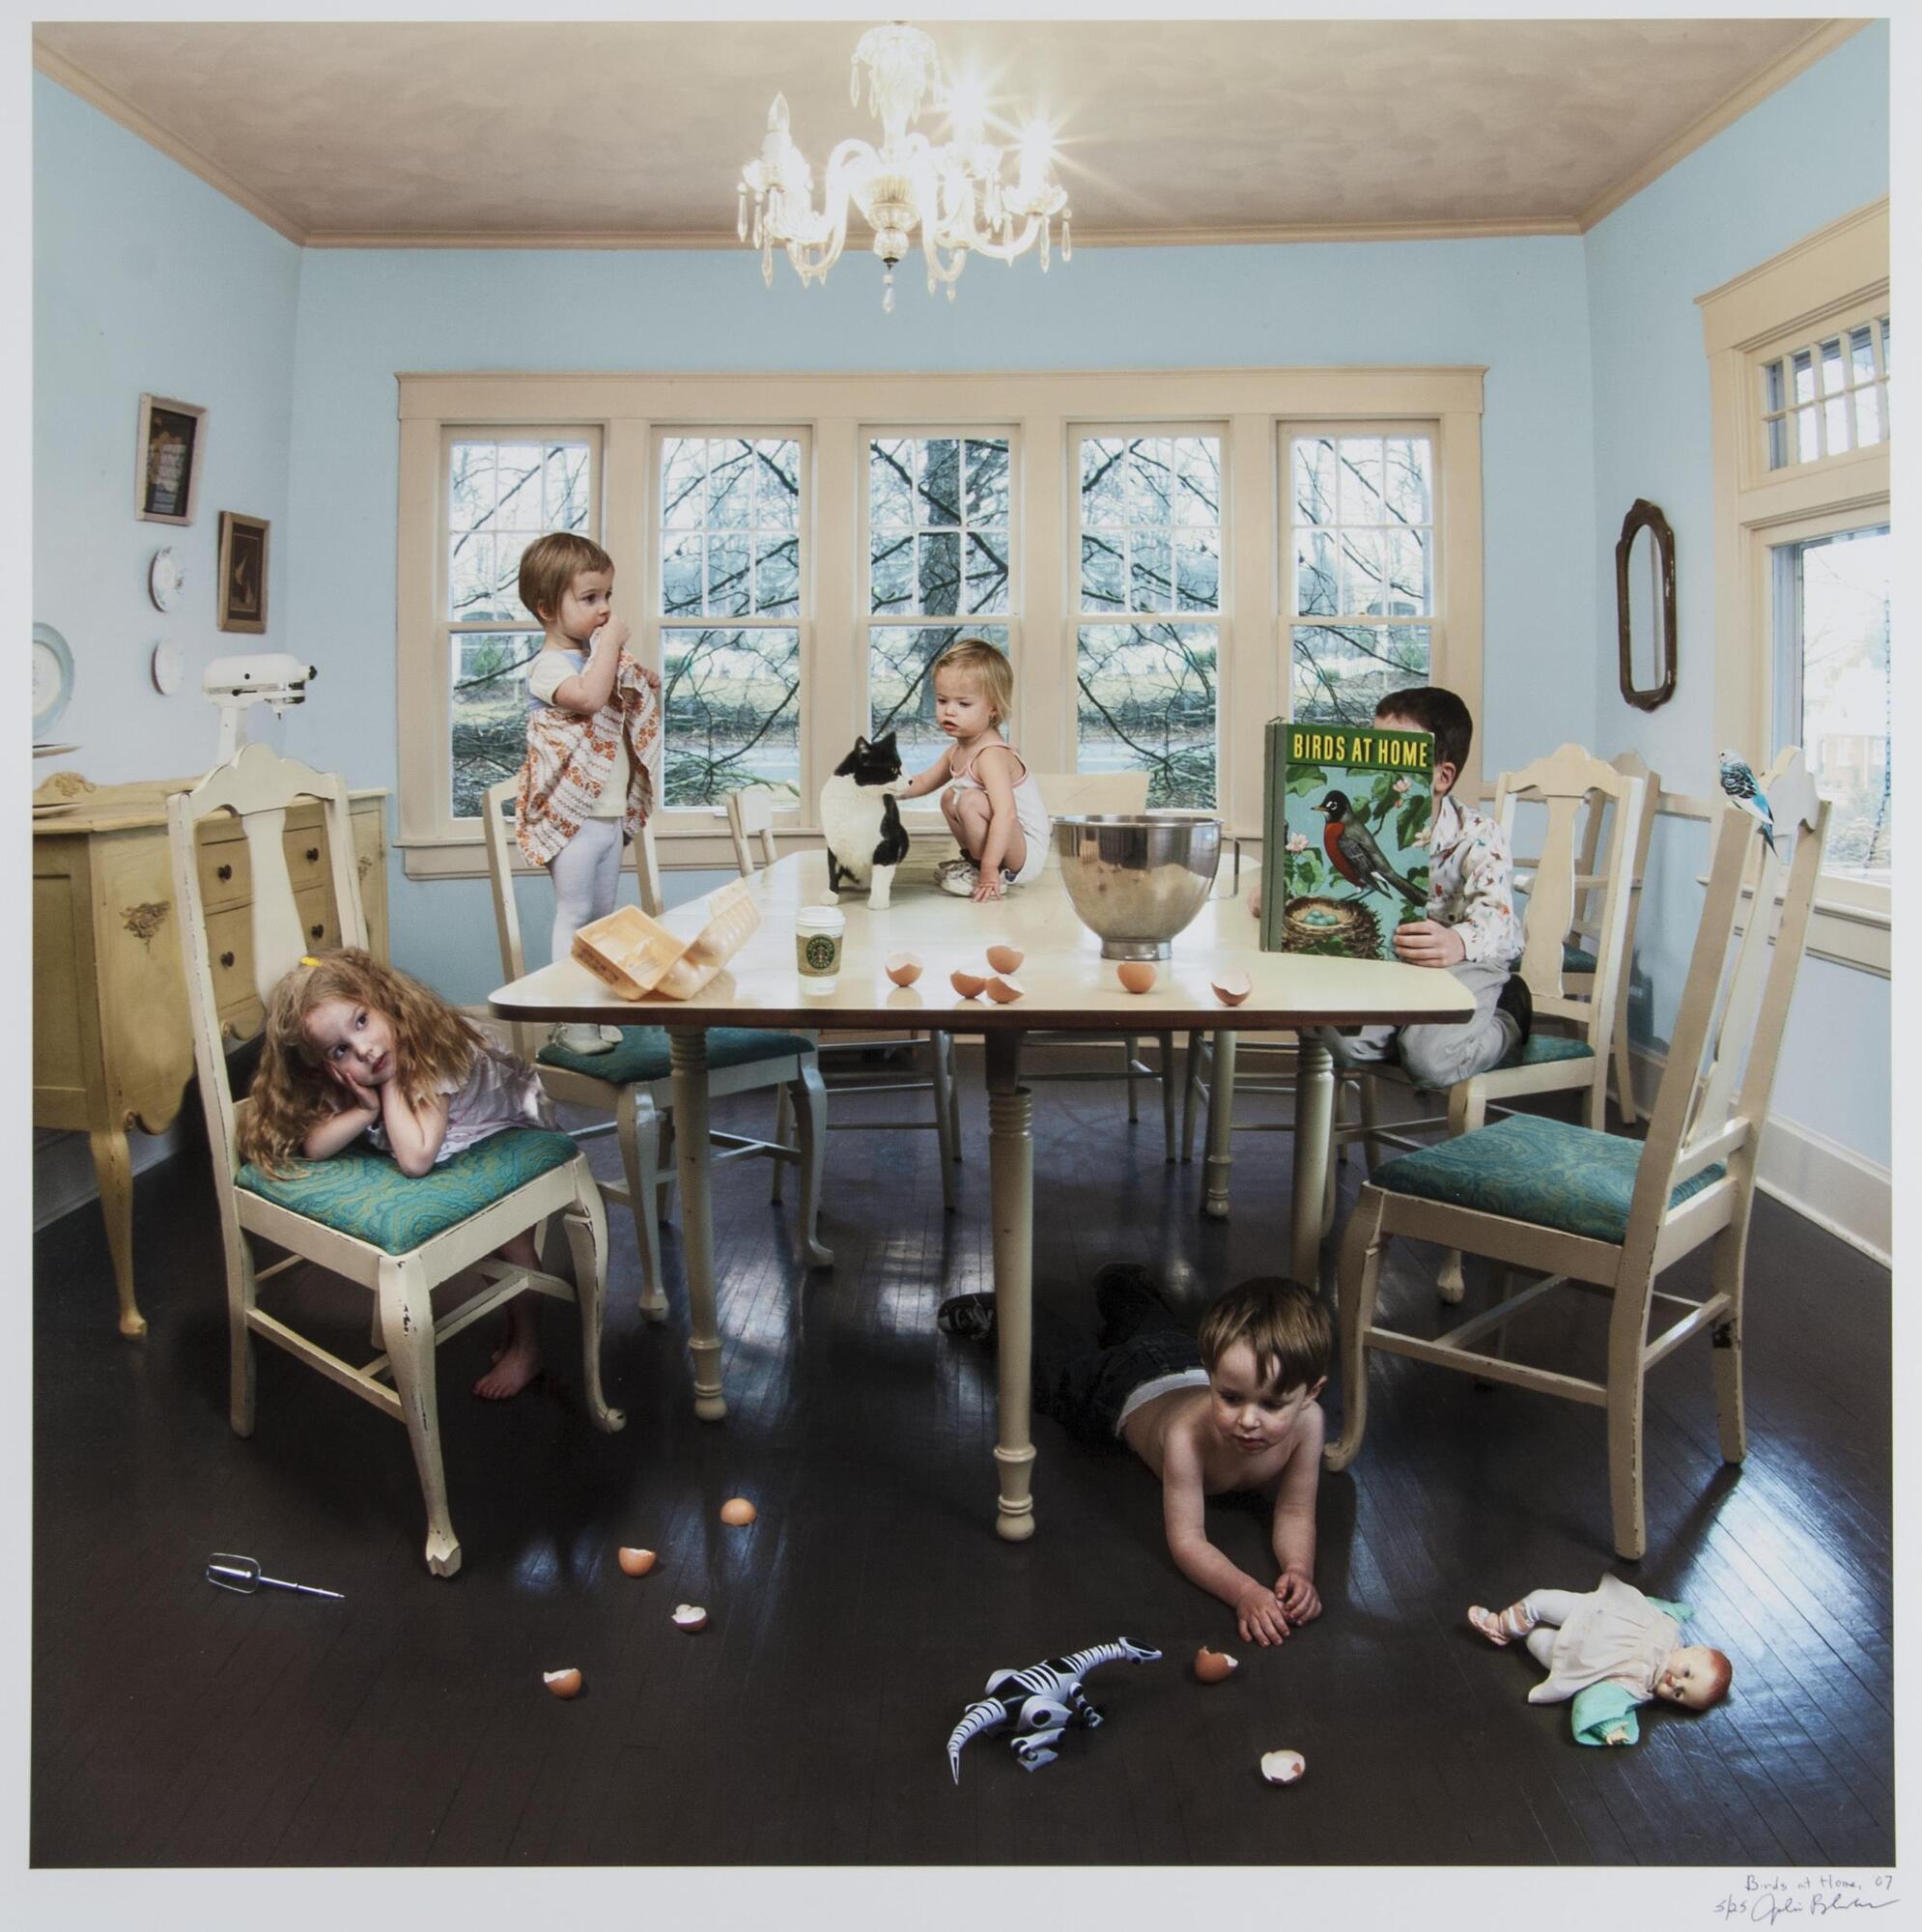 A color photograph of a group of children and a cat at a table. Each child engages with something in the room, which is in an organized disarray. Egg shells fall from the table to the floor, toys are strewn about, and an infant and cat sit in the middle of the table.